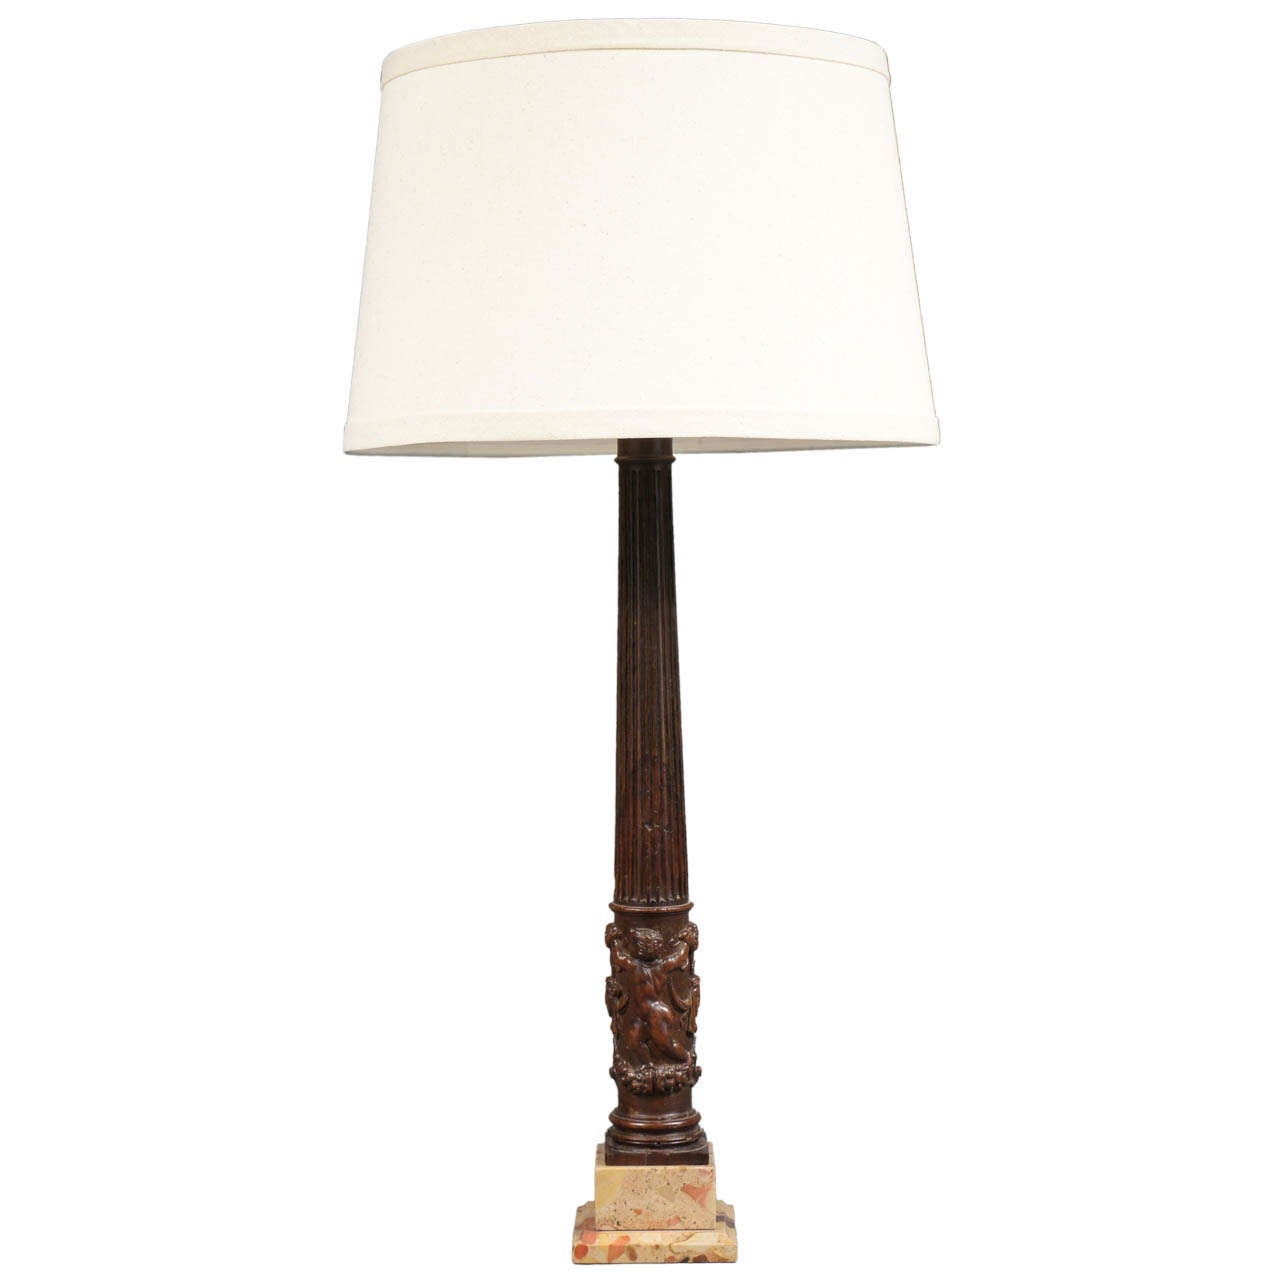 Single Table Lamp For Sale